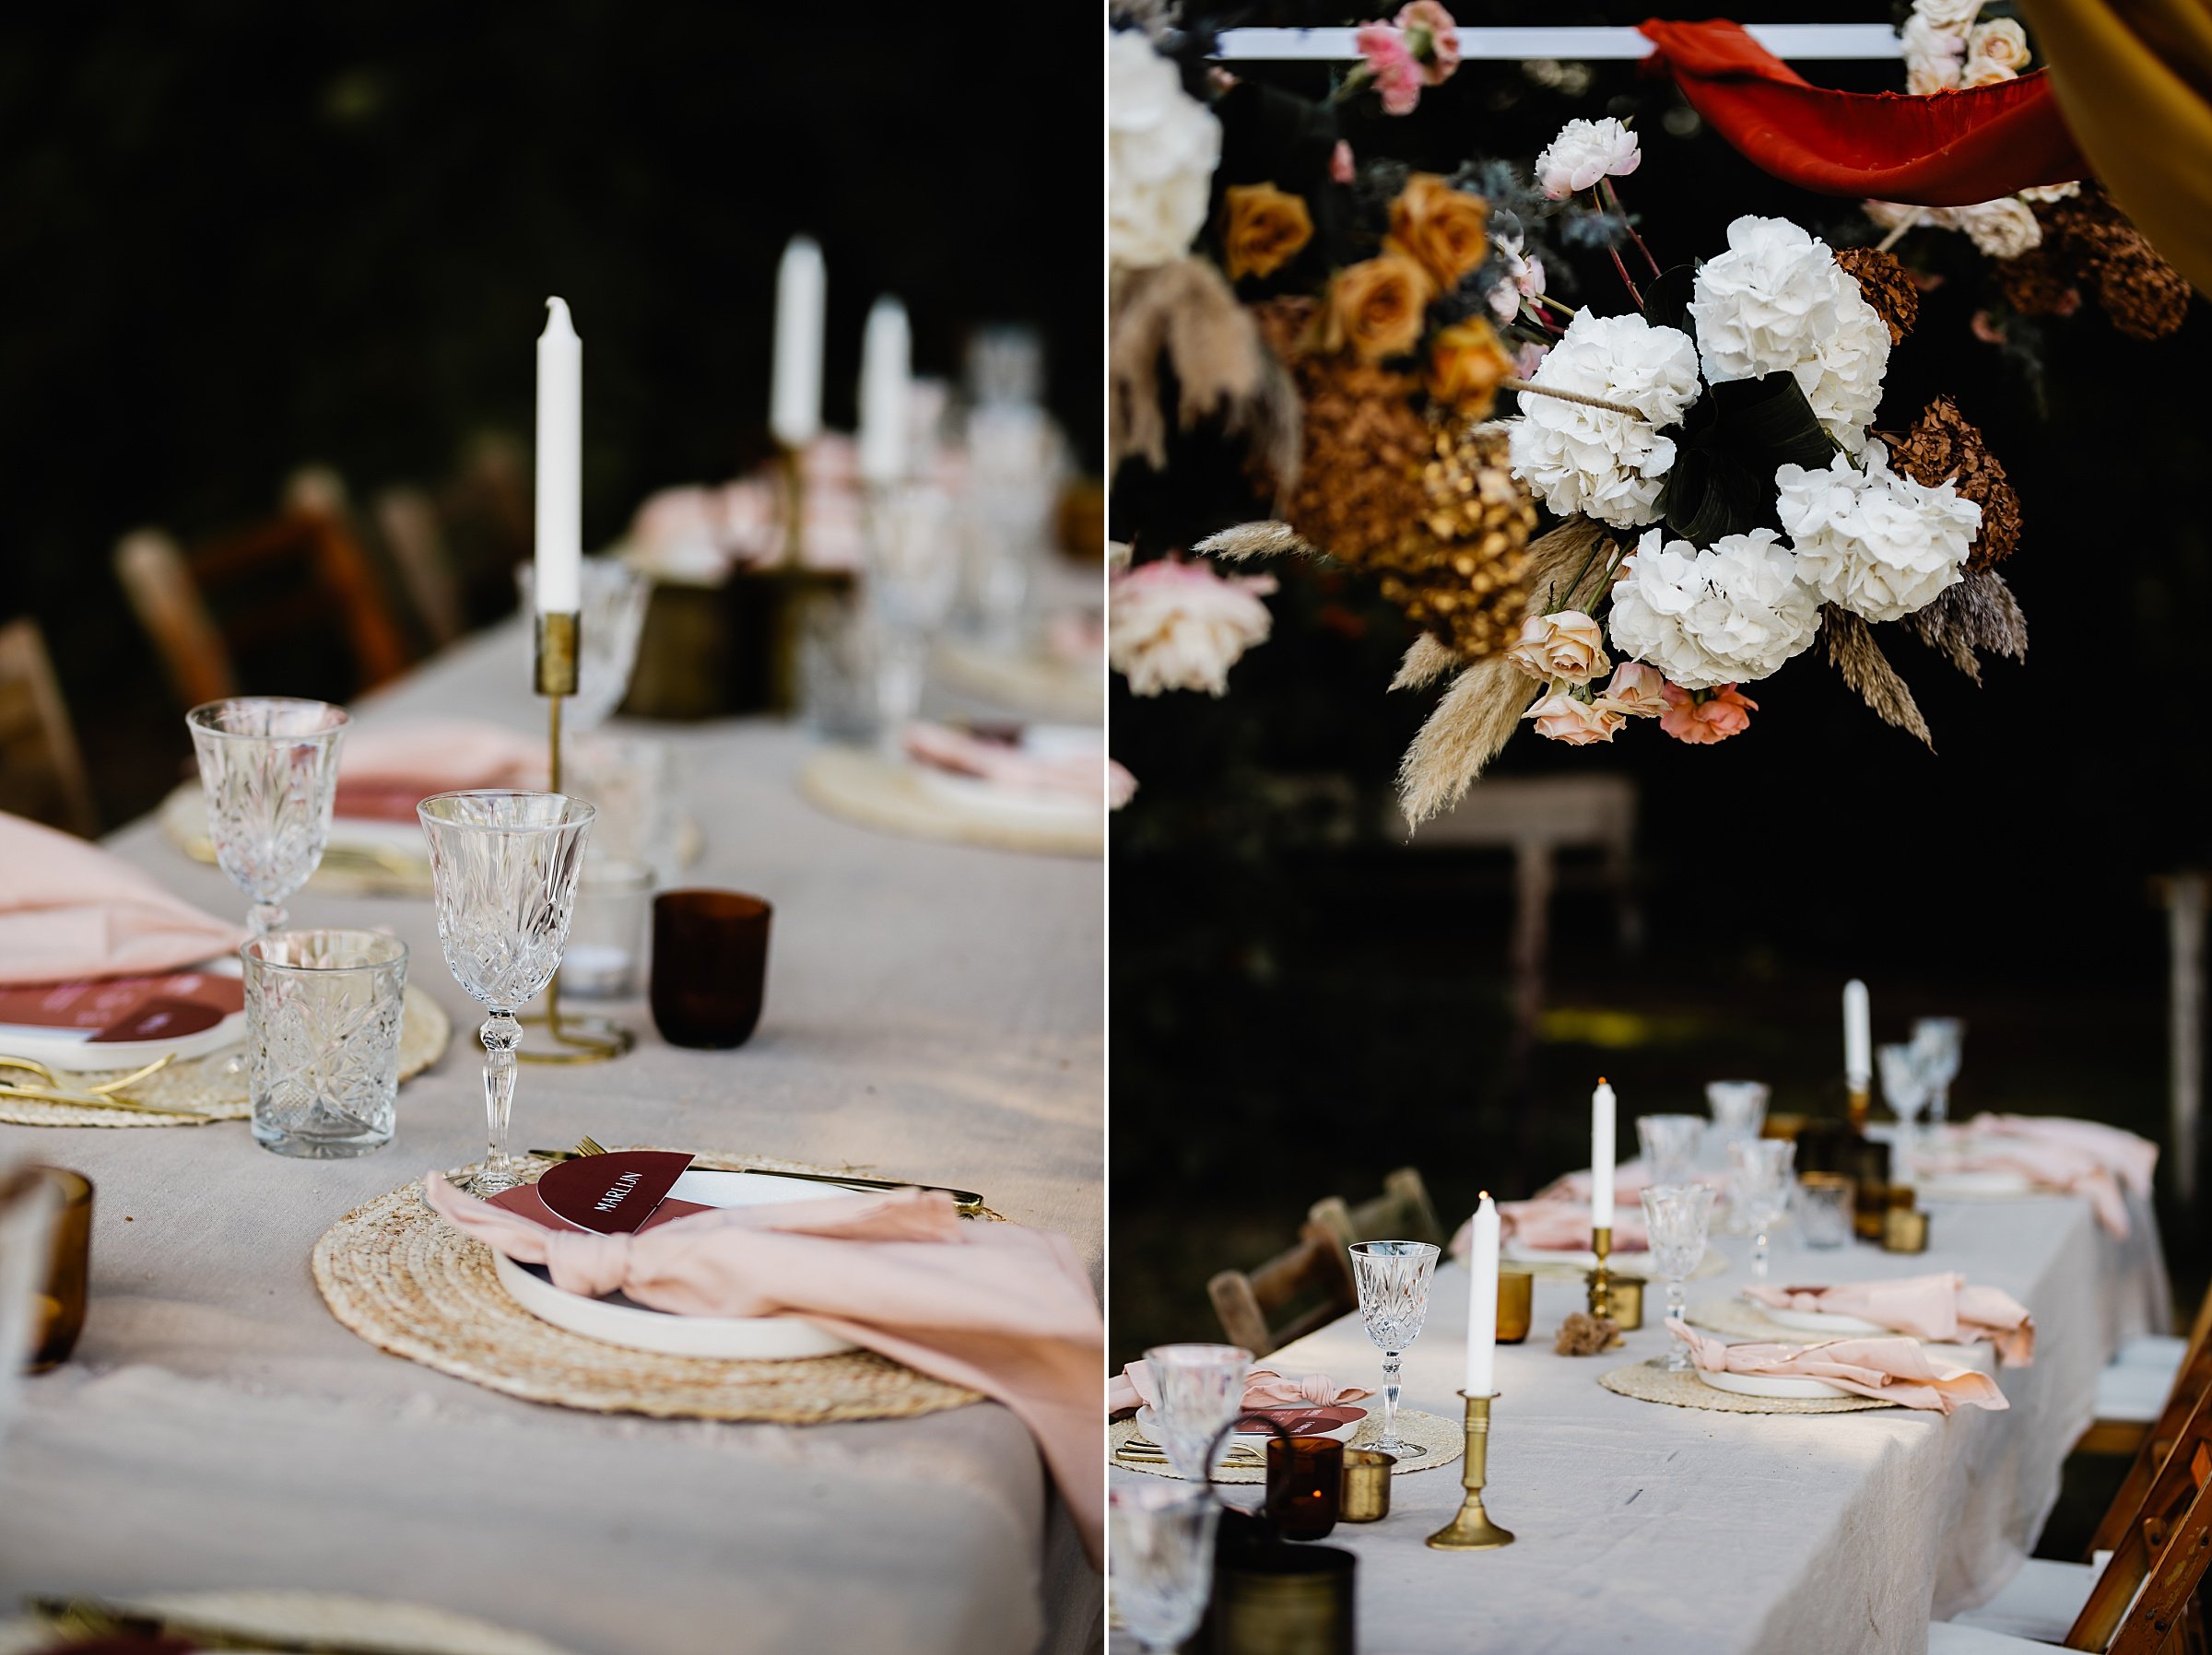 Super Fun Outdoor Summer Wedding with an Earthy Tone Color Palette071.jpg